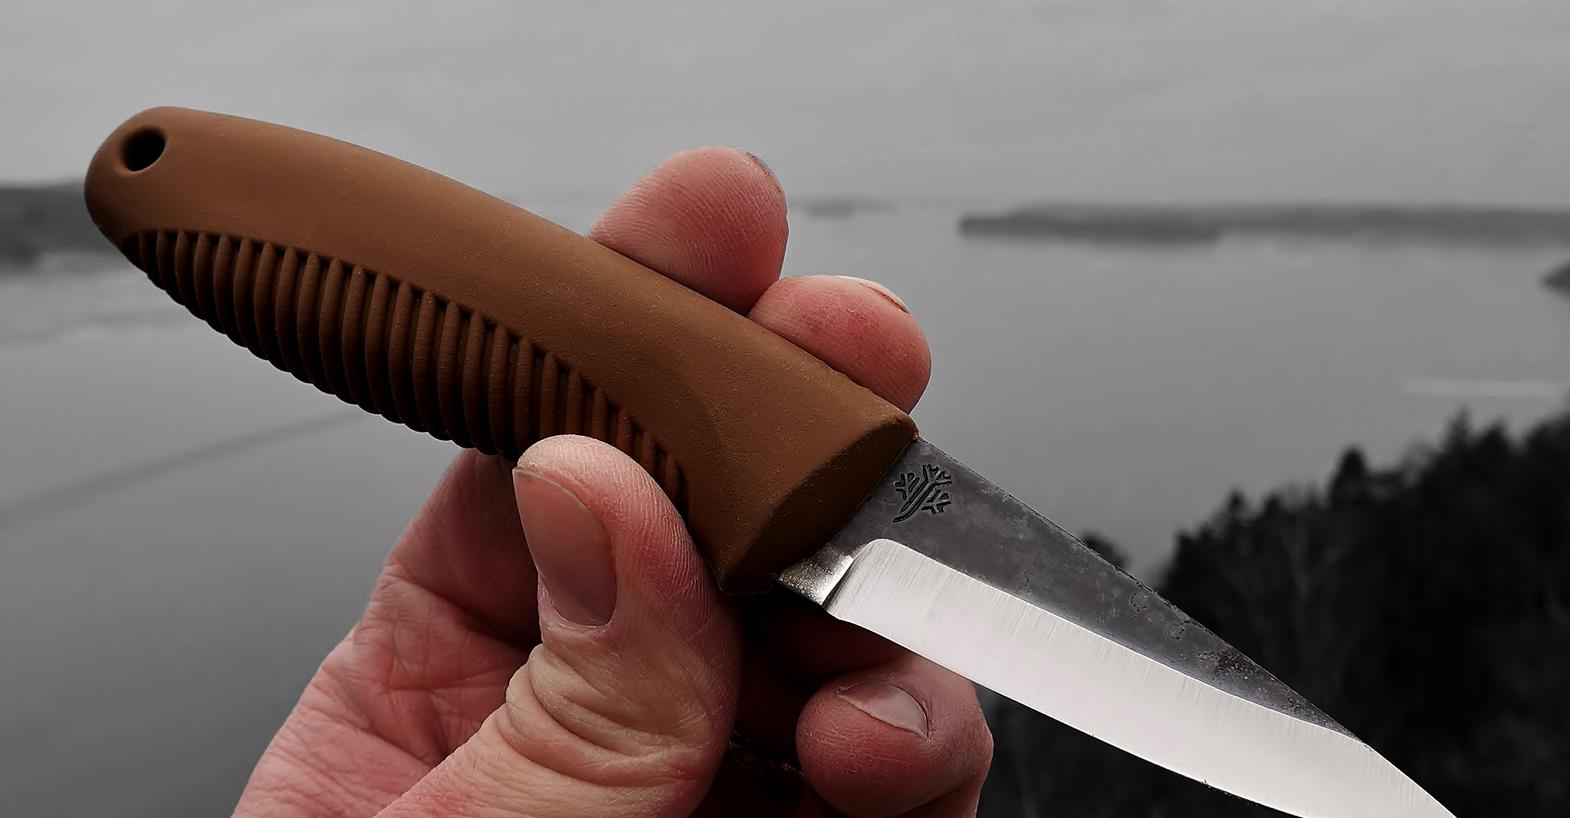 M23 Ranger Cub - Lightweight compact knife ideal for camping and whittling